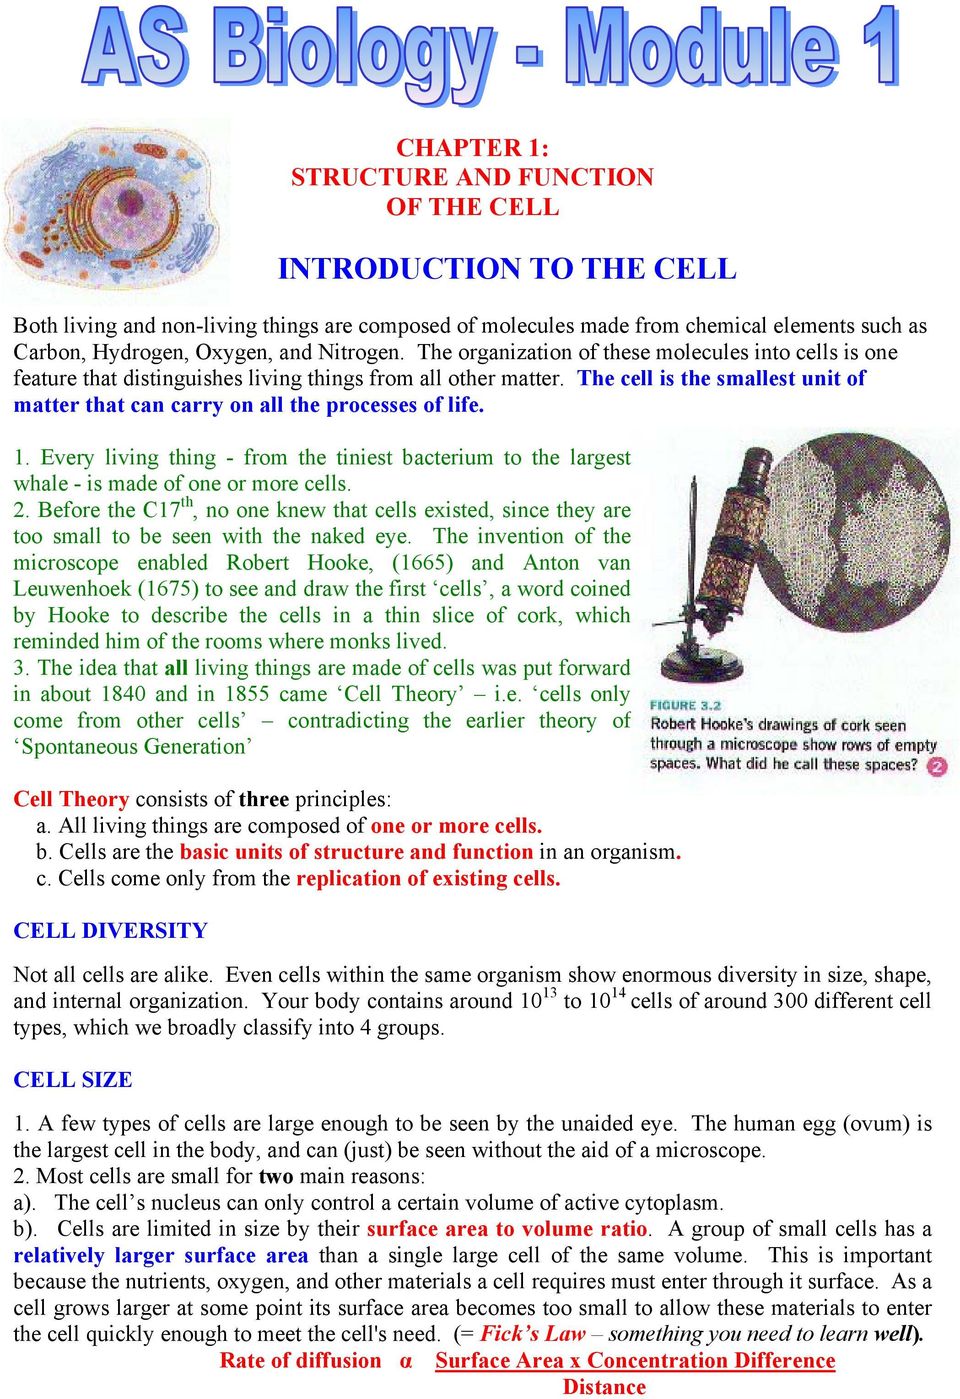 The cell is the smallest unit of matter that can carry on all the processes of life. 1. Every living thing - from the tiniest bacterium to the largest whale - is made of one or more cells. 2.